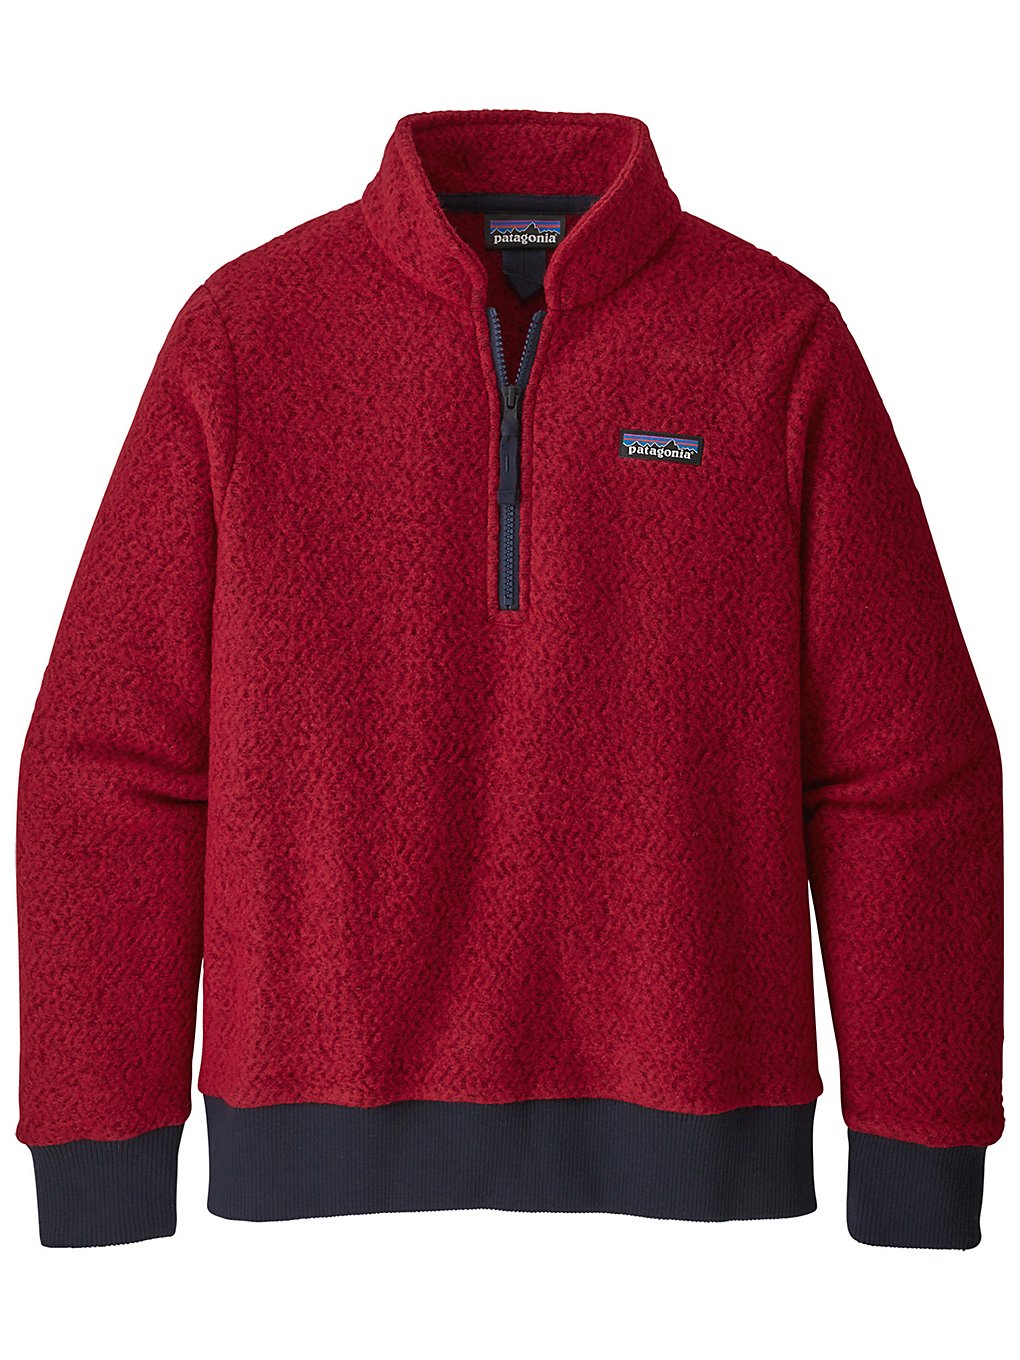 patagonia woolyester fleece pullover molten lava